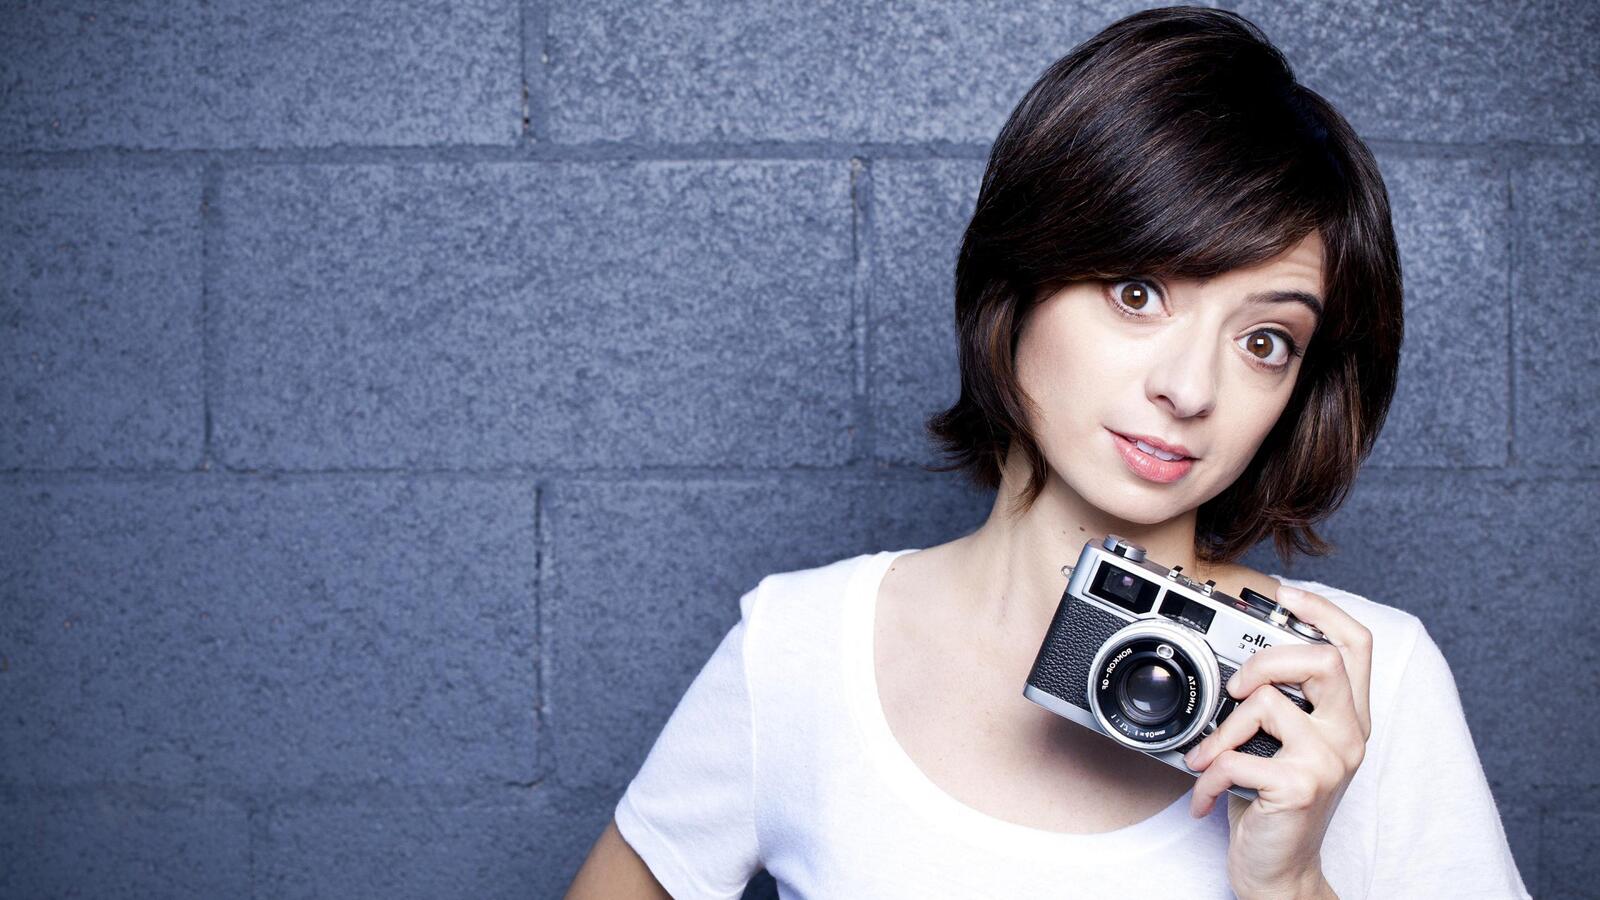 Free photo Kate Micucci with a camera.